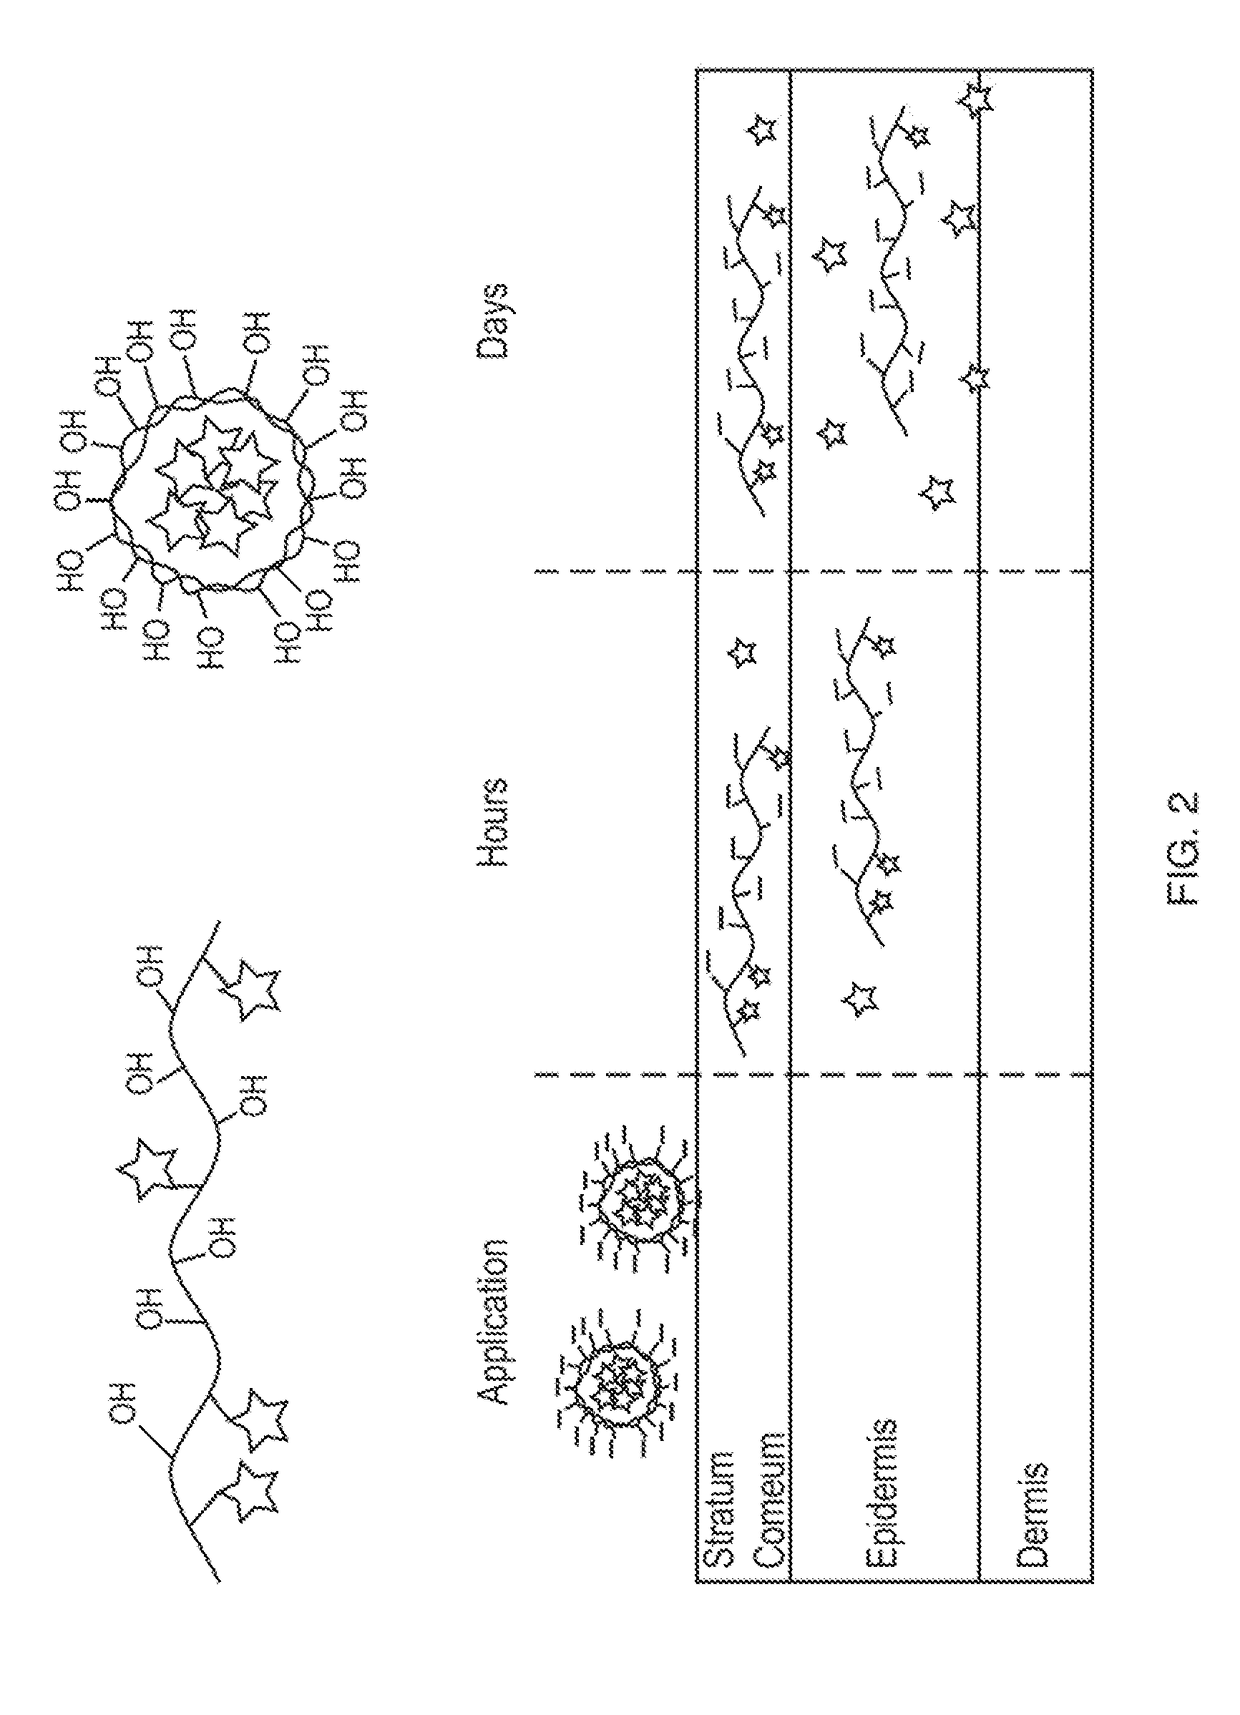 Nano-fibular nanoparticle polymer-drug conjugate for sustained dermal delivery of retinoids